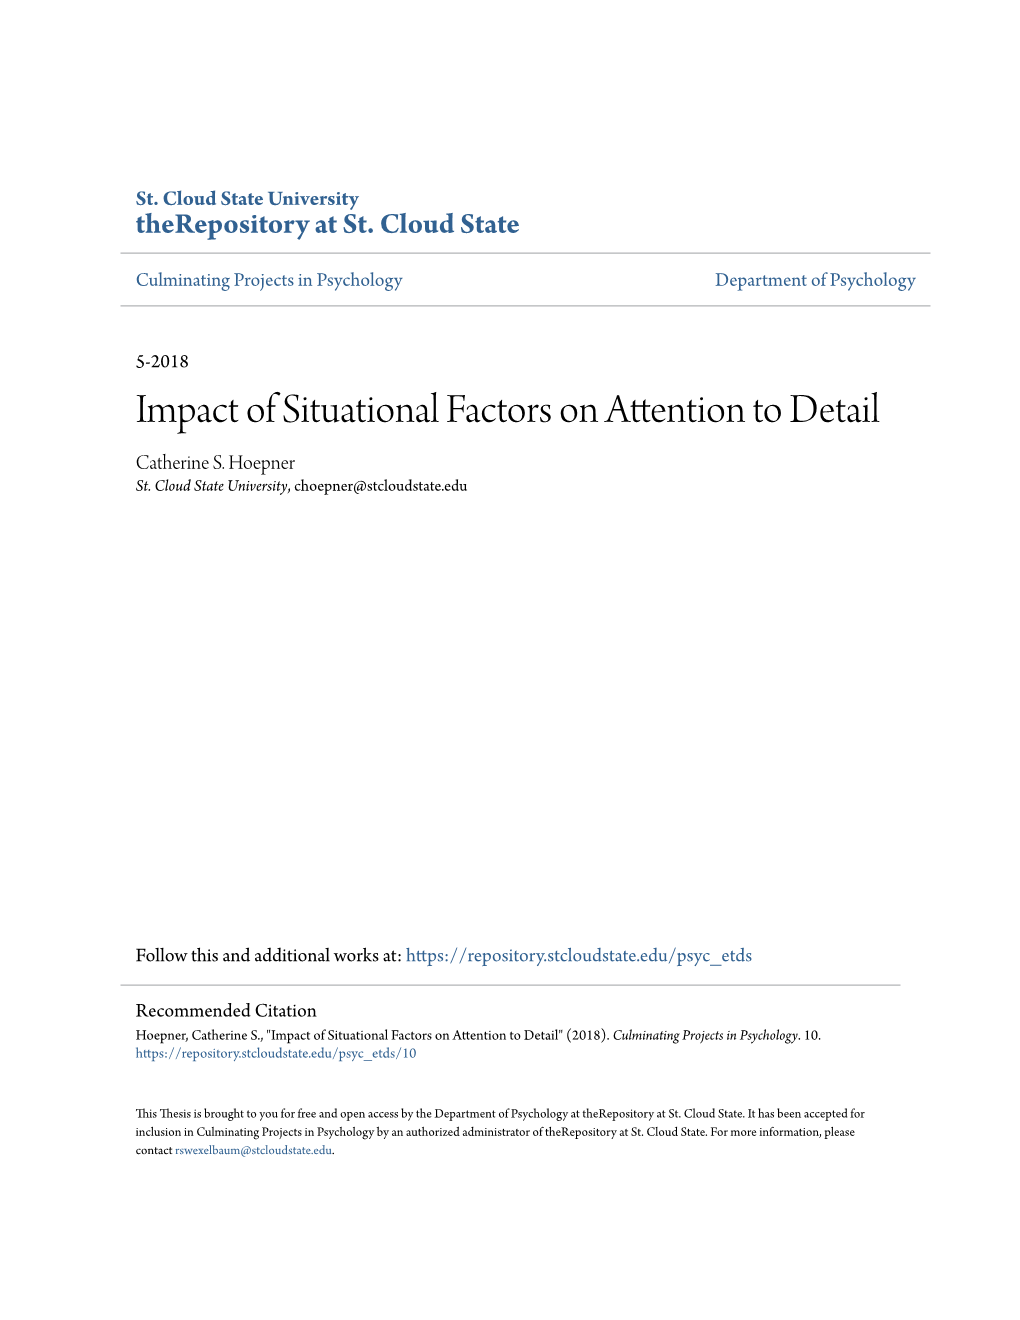 Impact of Situational Factors on Attention to Detail Catherine S